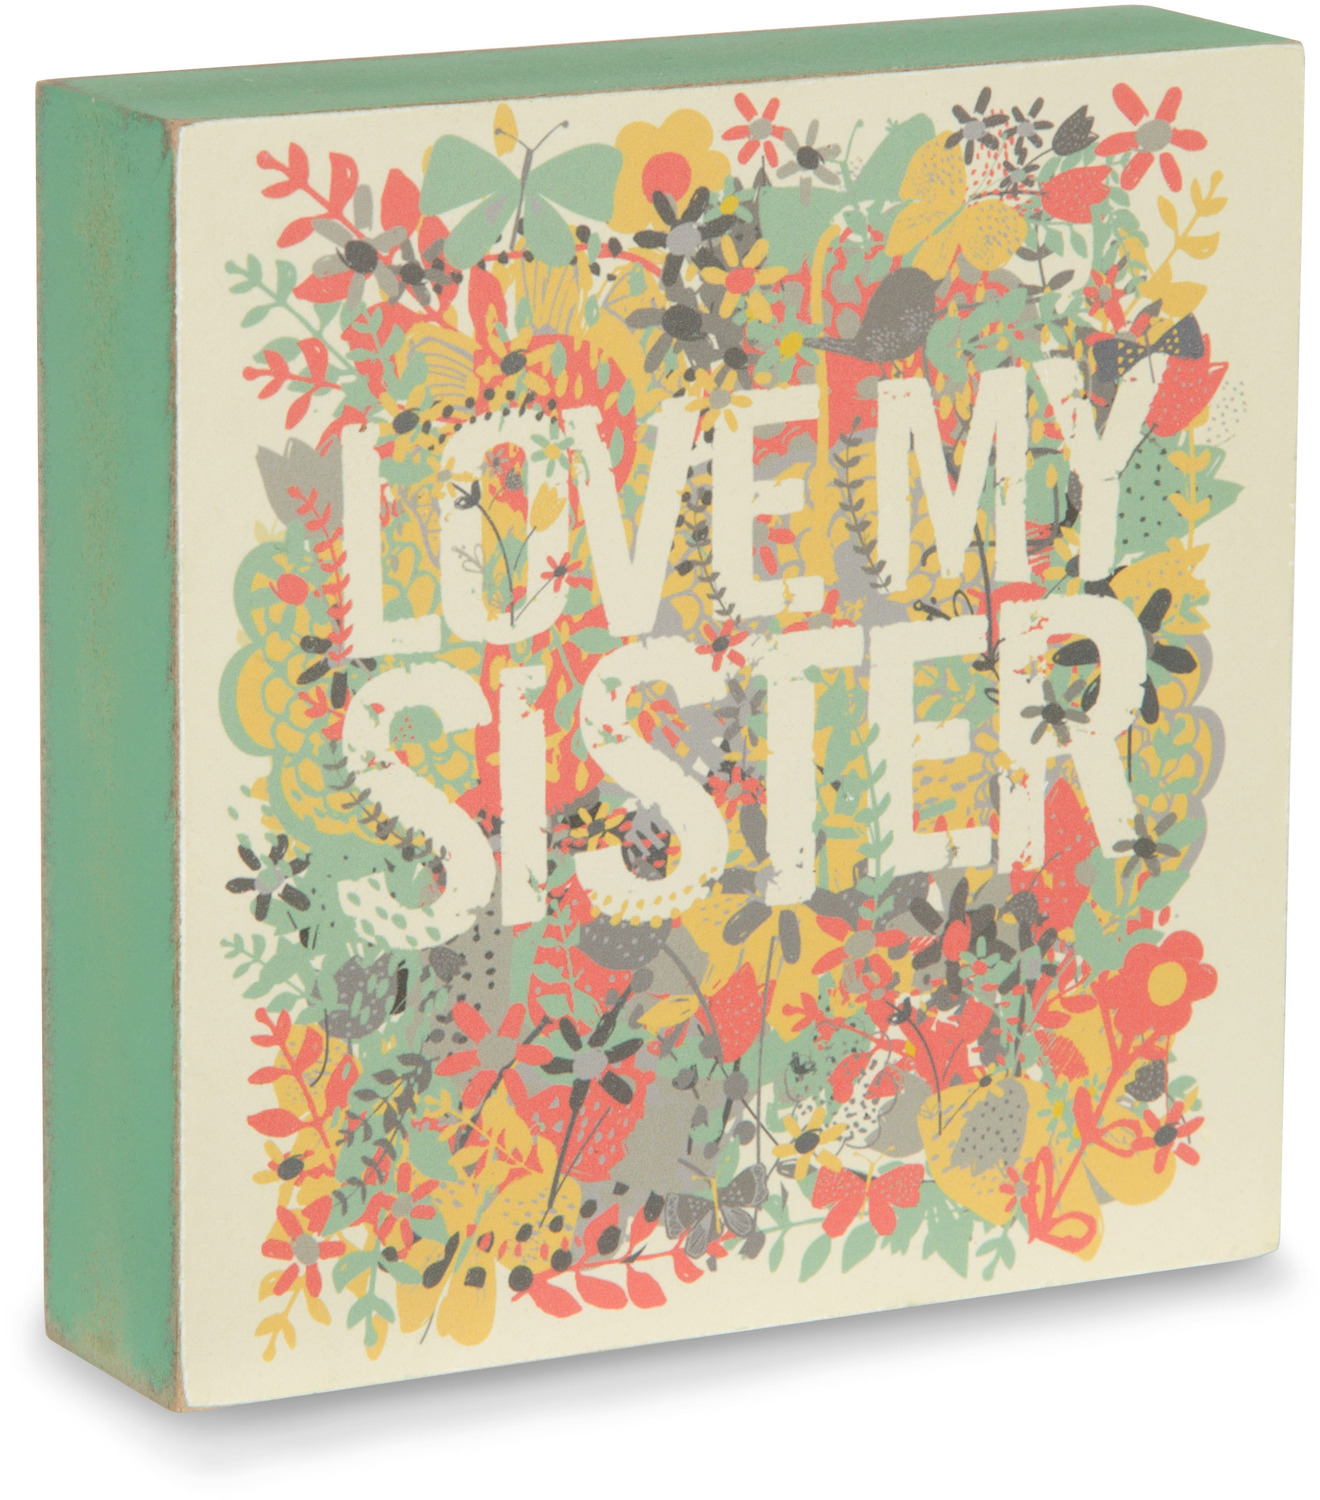 Love my Sister by Bloom by Amylee Weeks - Love my Sister - 4" x 4" Plaque